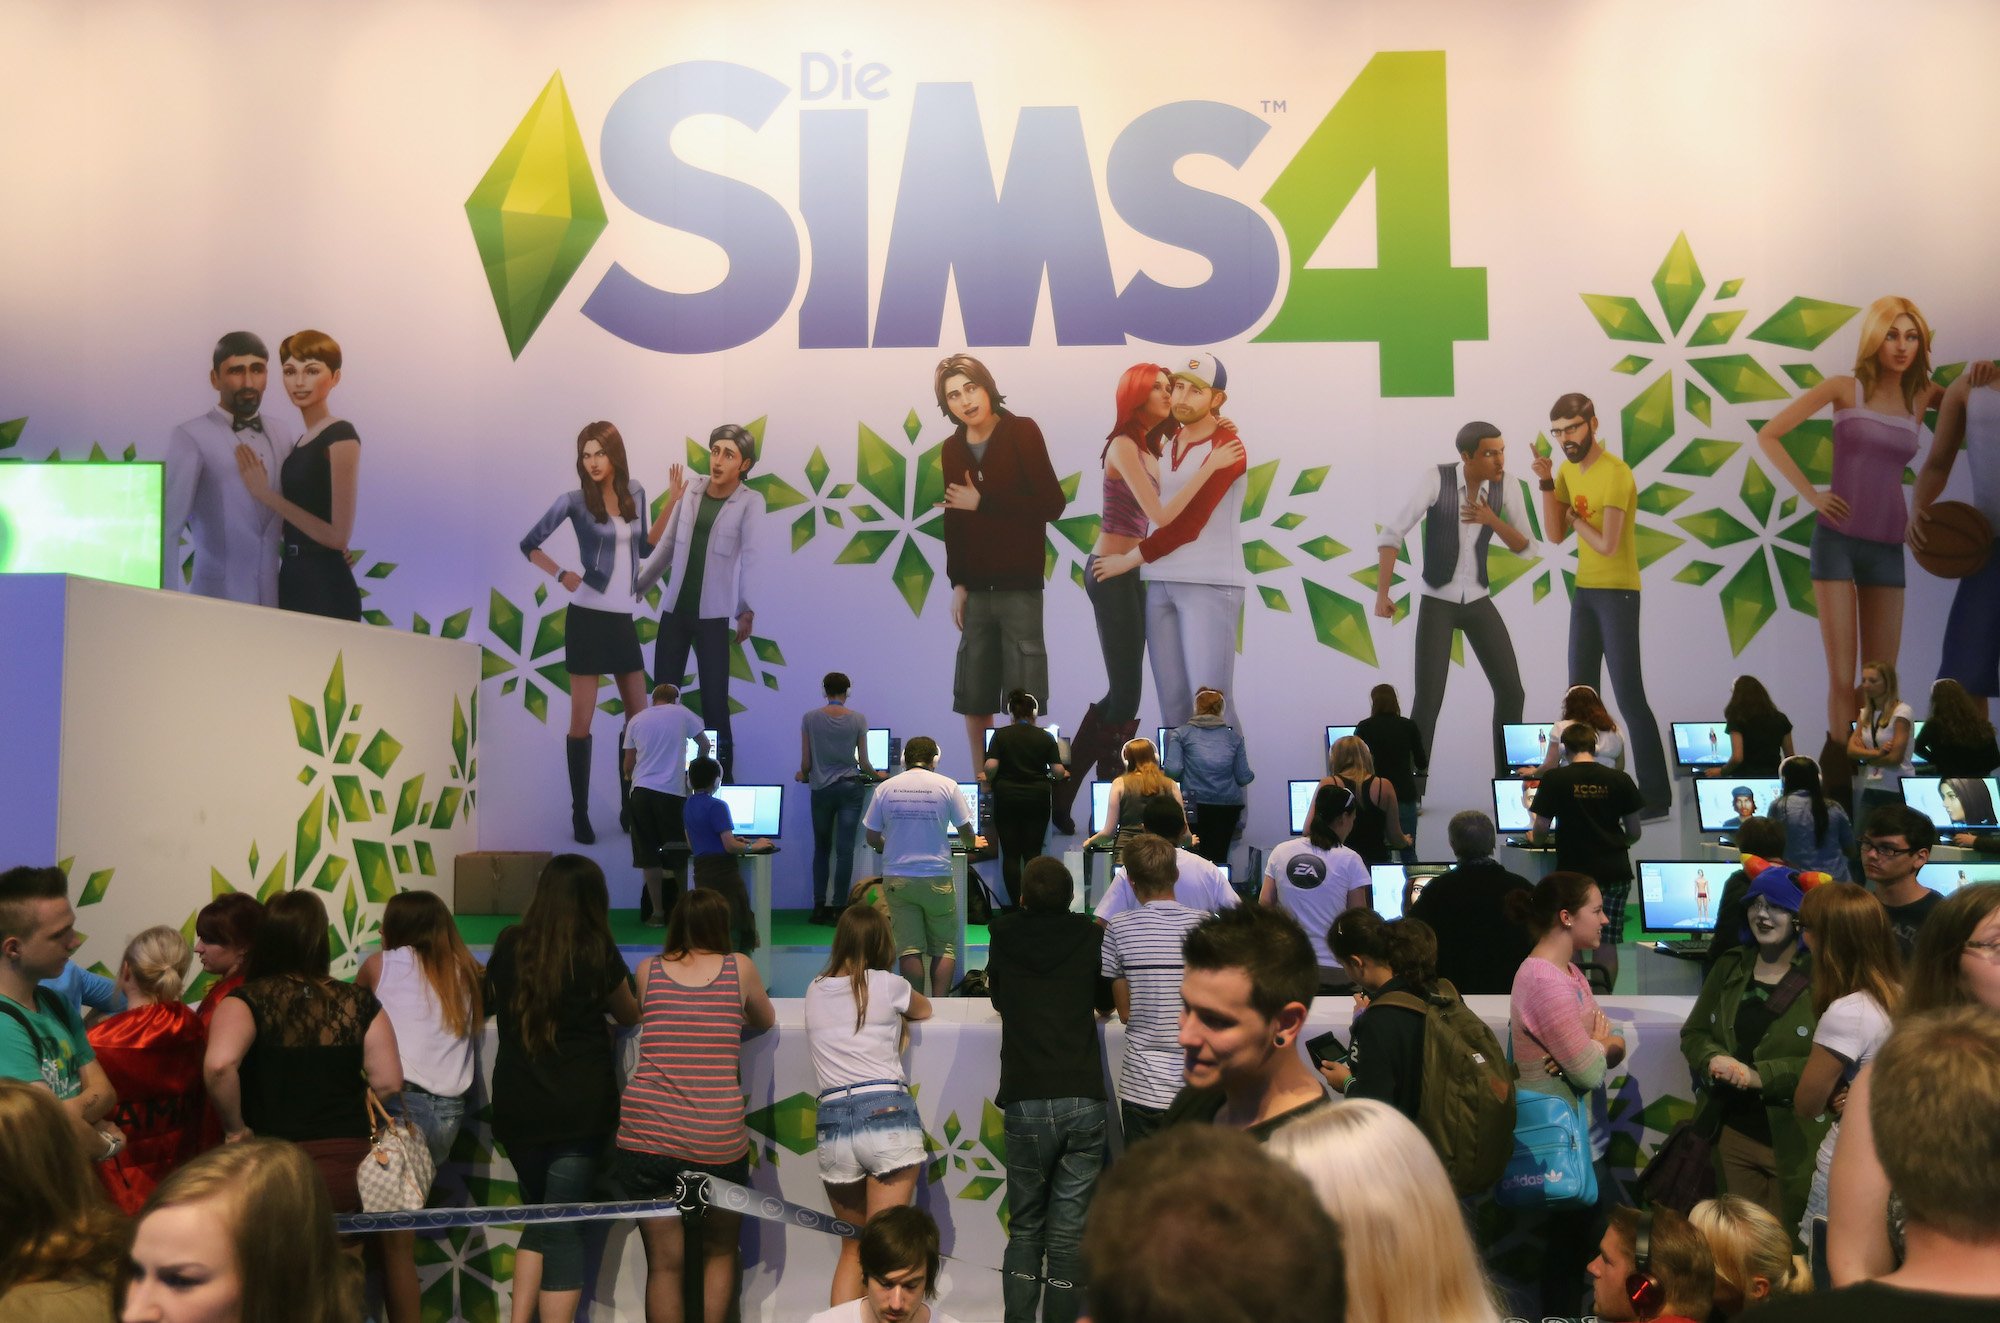 How to Activate Cheats in The Sims 4 and Which Ones Are the Most Helpful in Gameplay